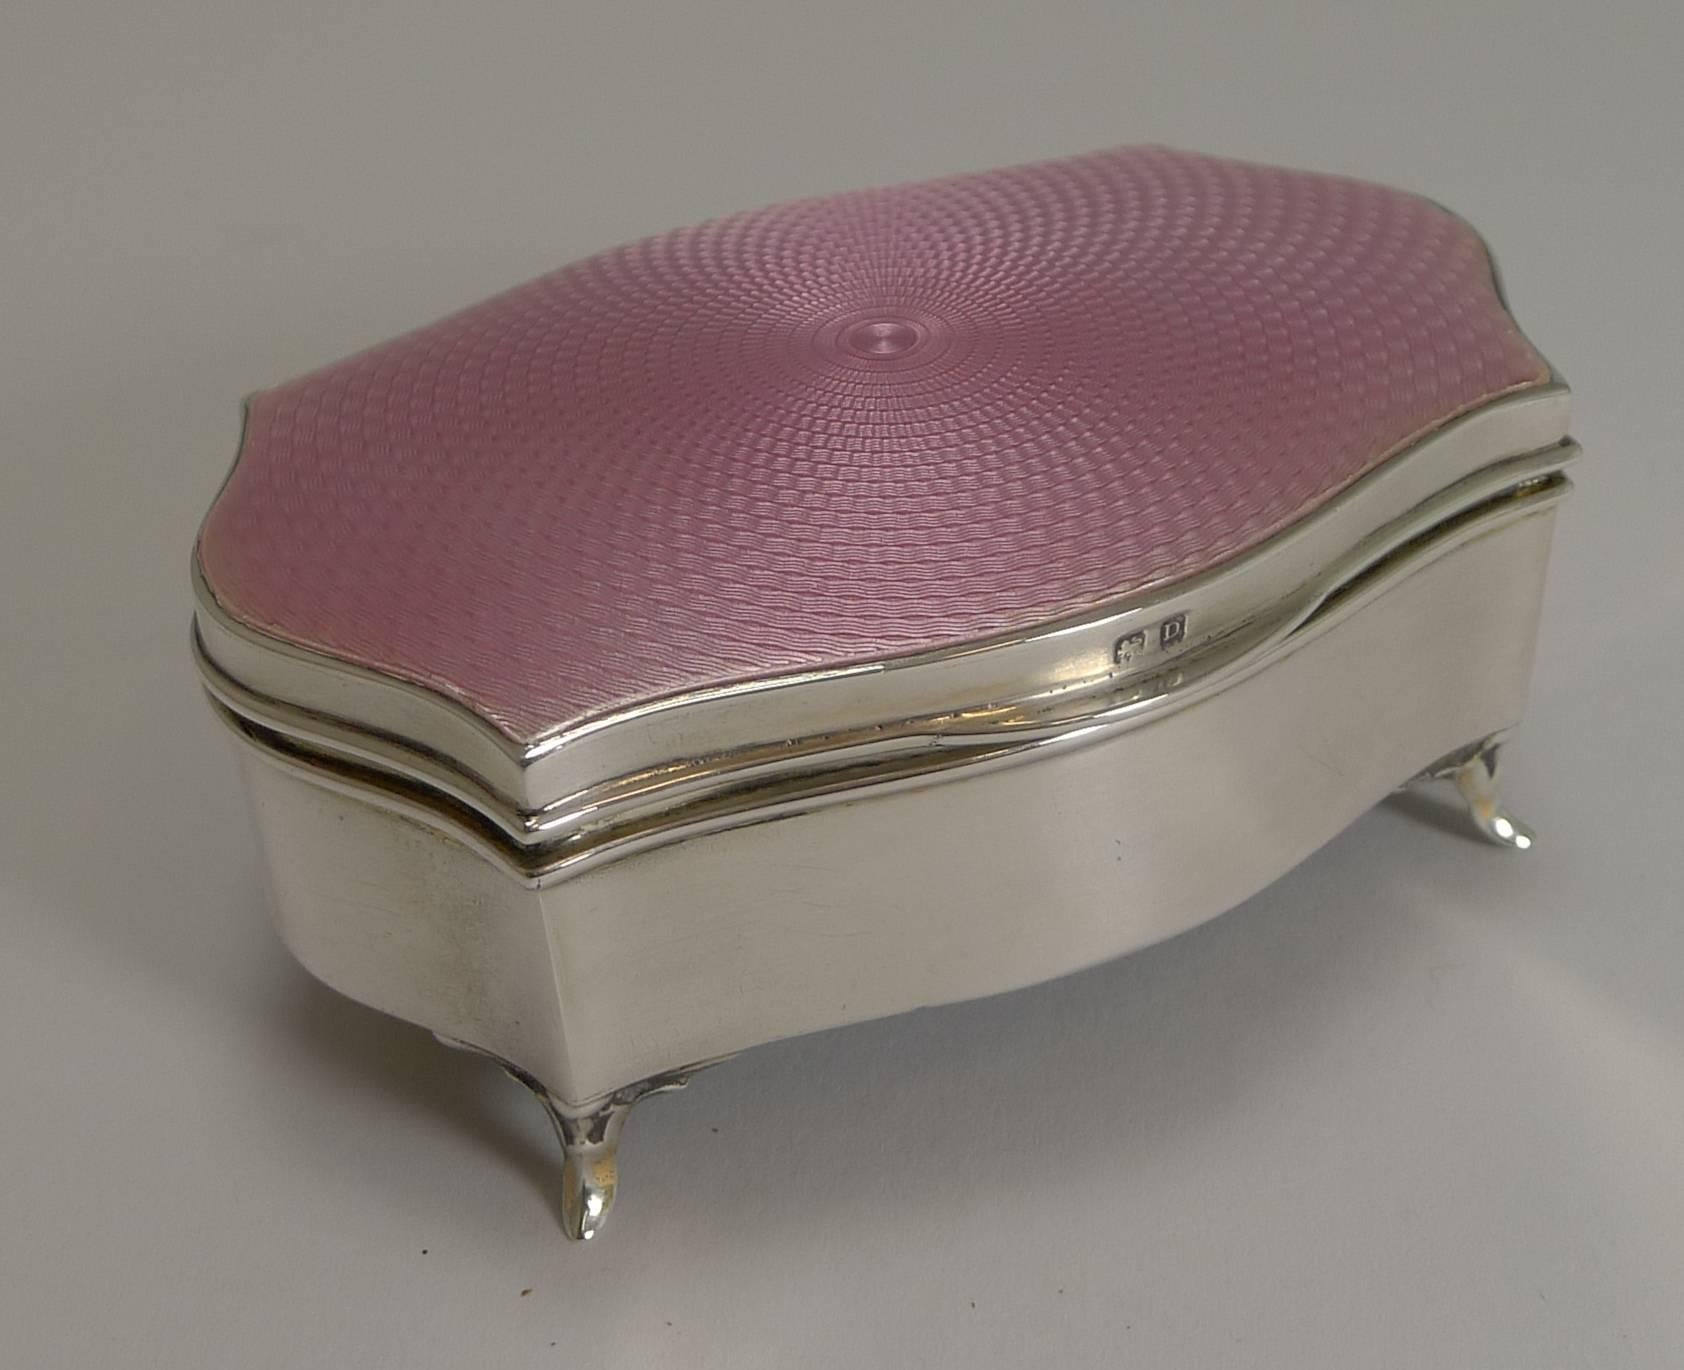 Always in high demand are these jewelry / ring boxes and even more sought-after in the most popular color, pink.

Made from English sterling silver and standing on four pretty feet, the top is covered in perfect pink guilloche enamel with a bright